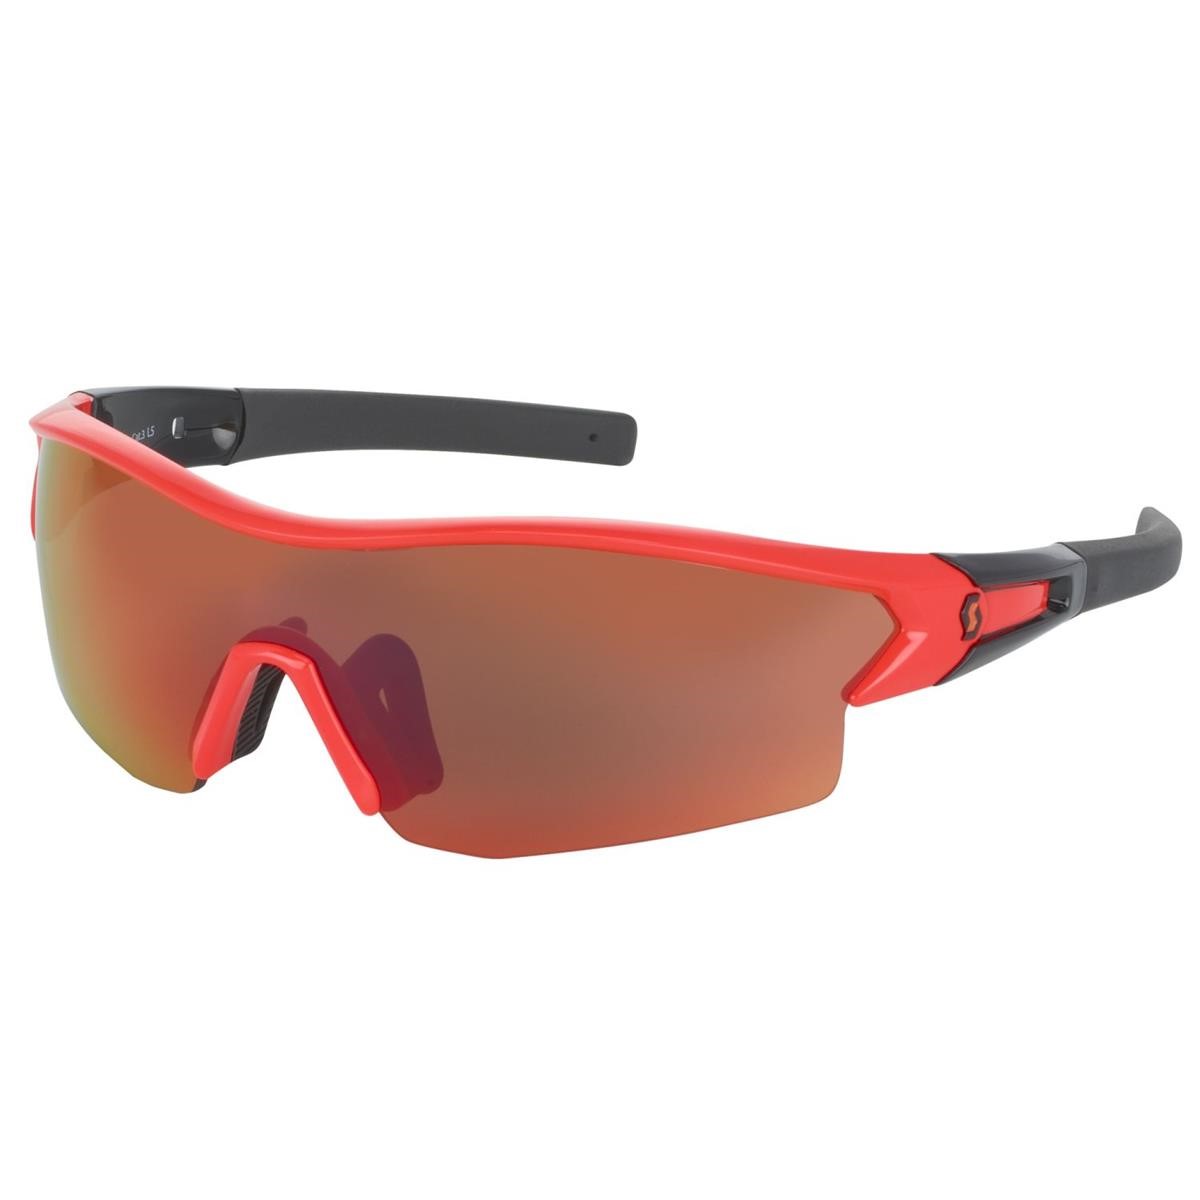 Scott Sportbrille Leap Neon Red Glossy/Black/Red Chrome + Clear